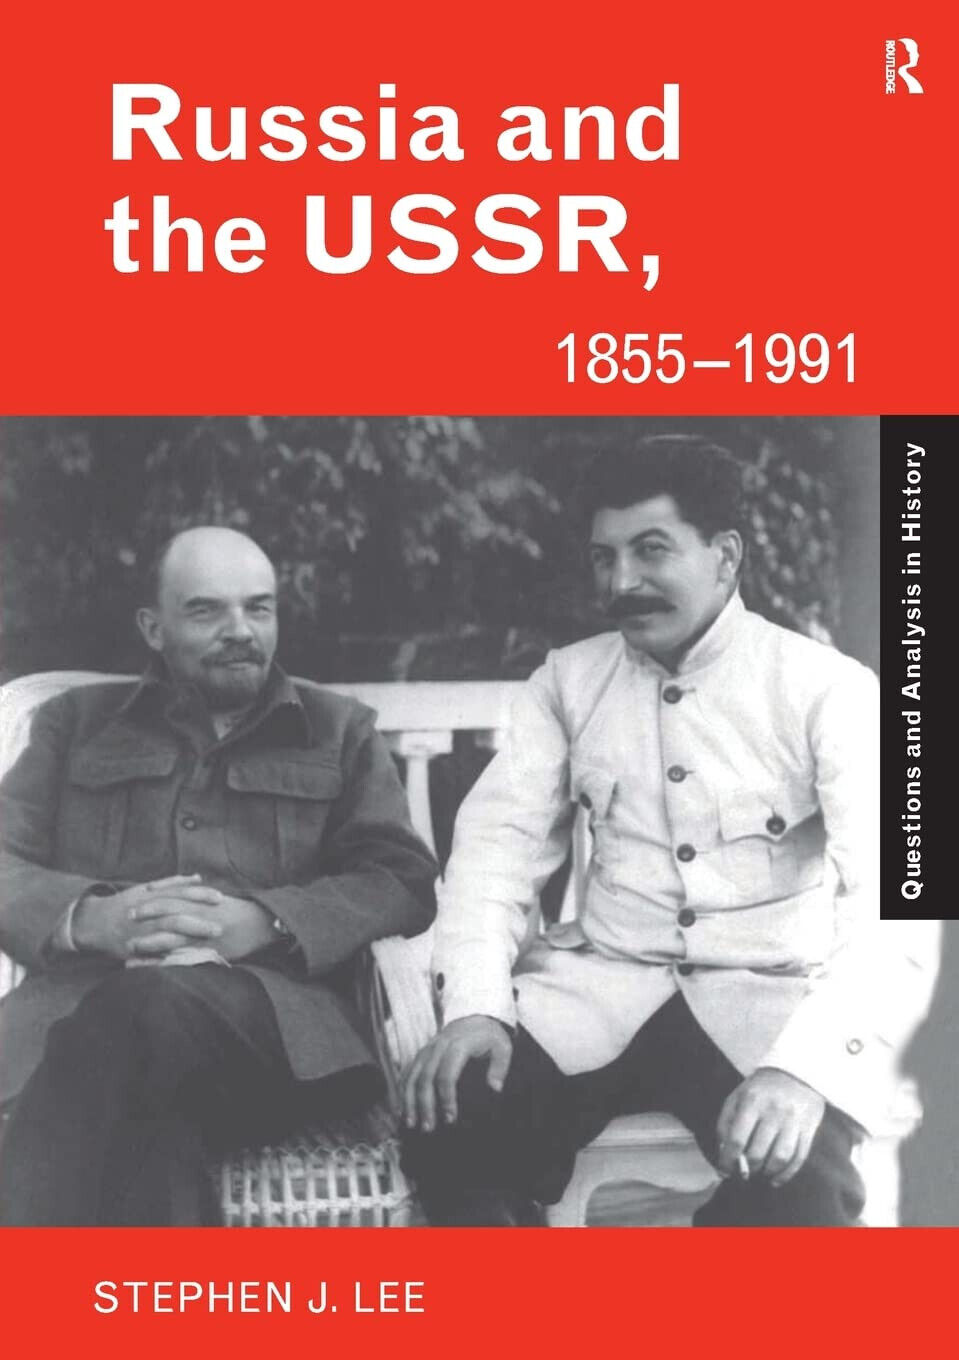 Russia and the USSR, 1855-1991 - Stephen J. Lee - Routledge, 2005 libro usato